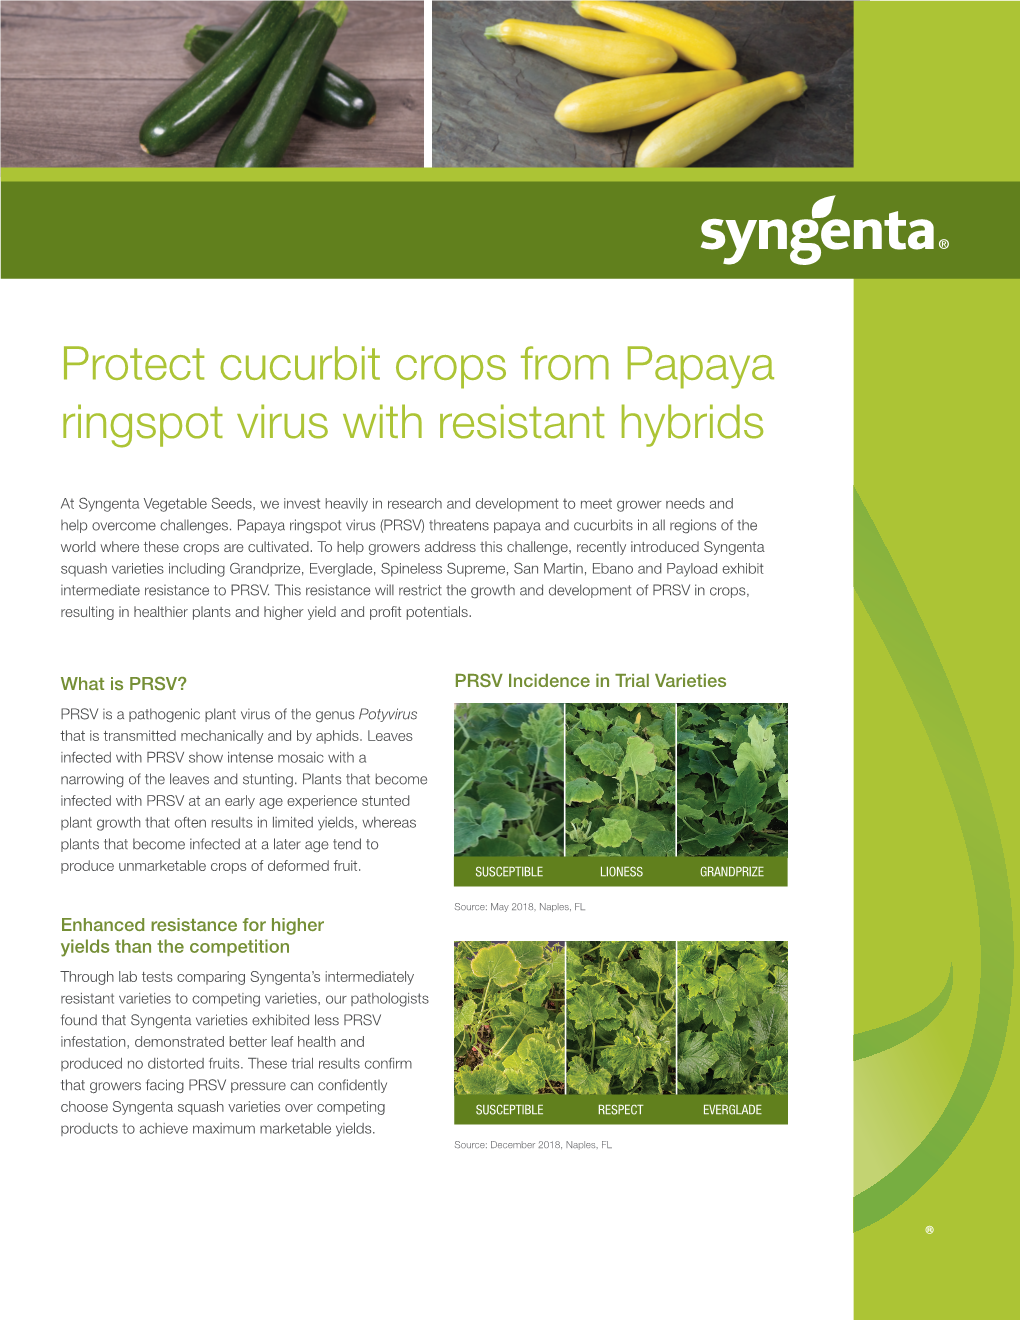 Protect Cucurbit Crops from Papaya Ringspot Virus with Resistant Hybrids